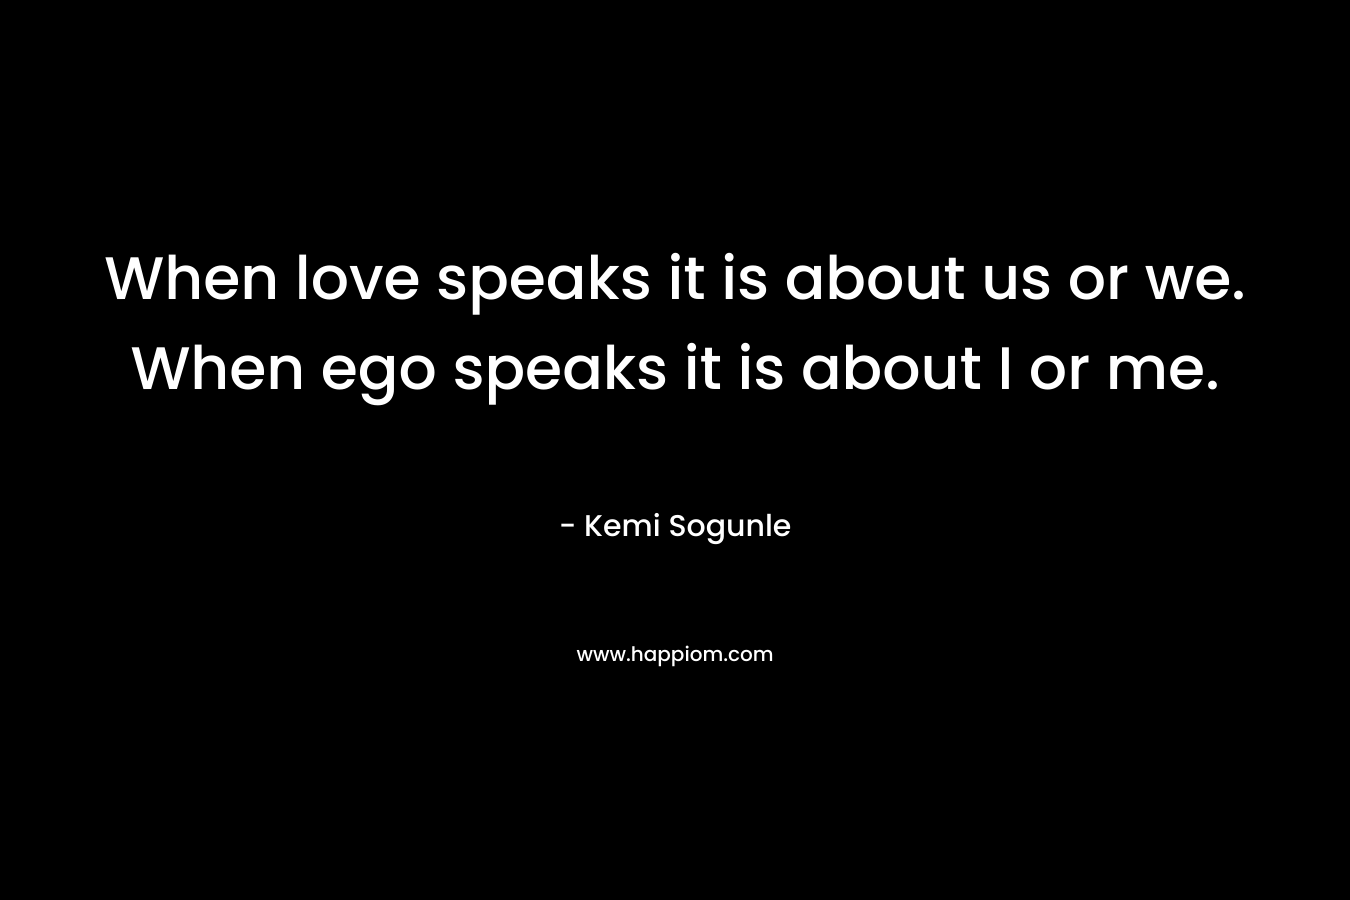 When love speaks it is about us or we. When ego speaks it is about I or me.